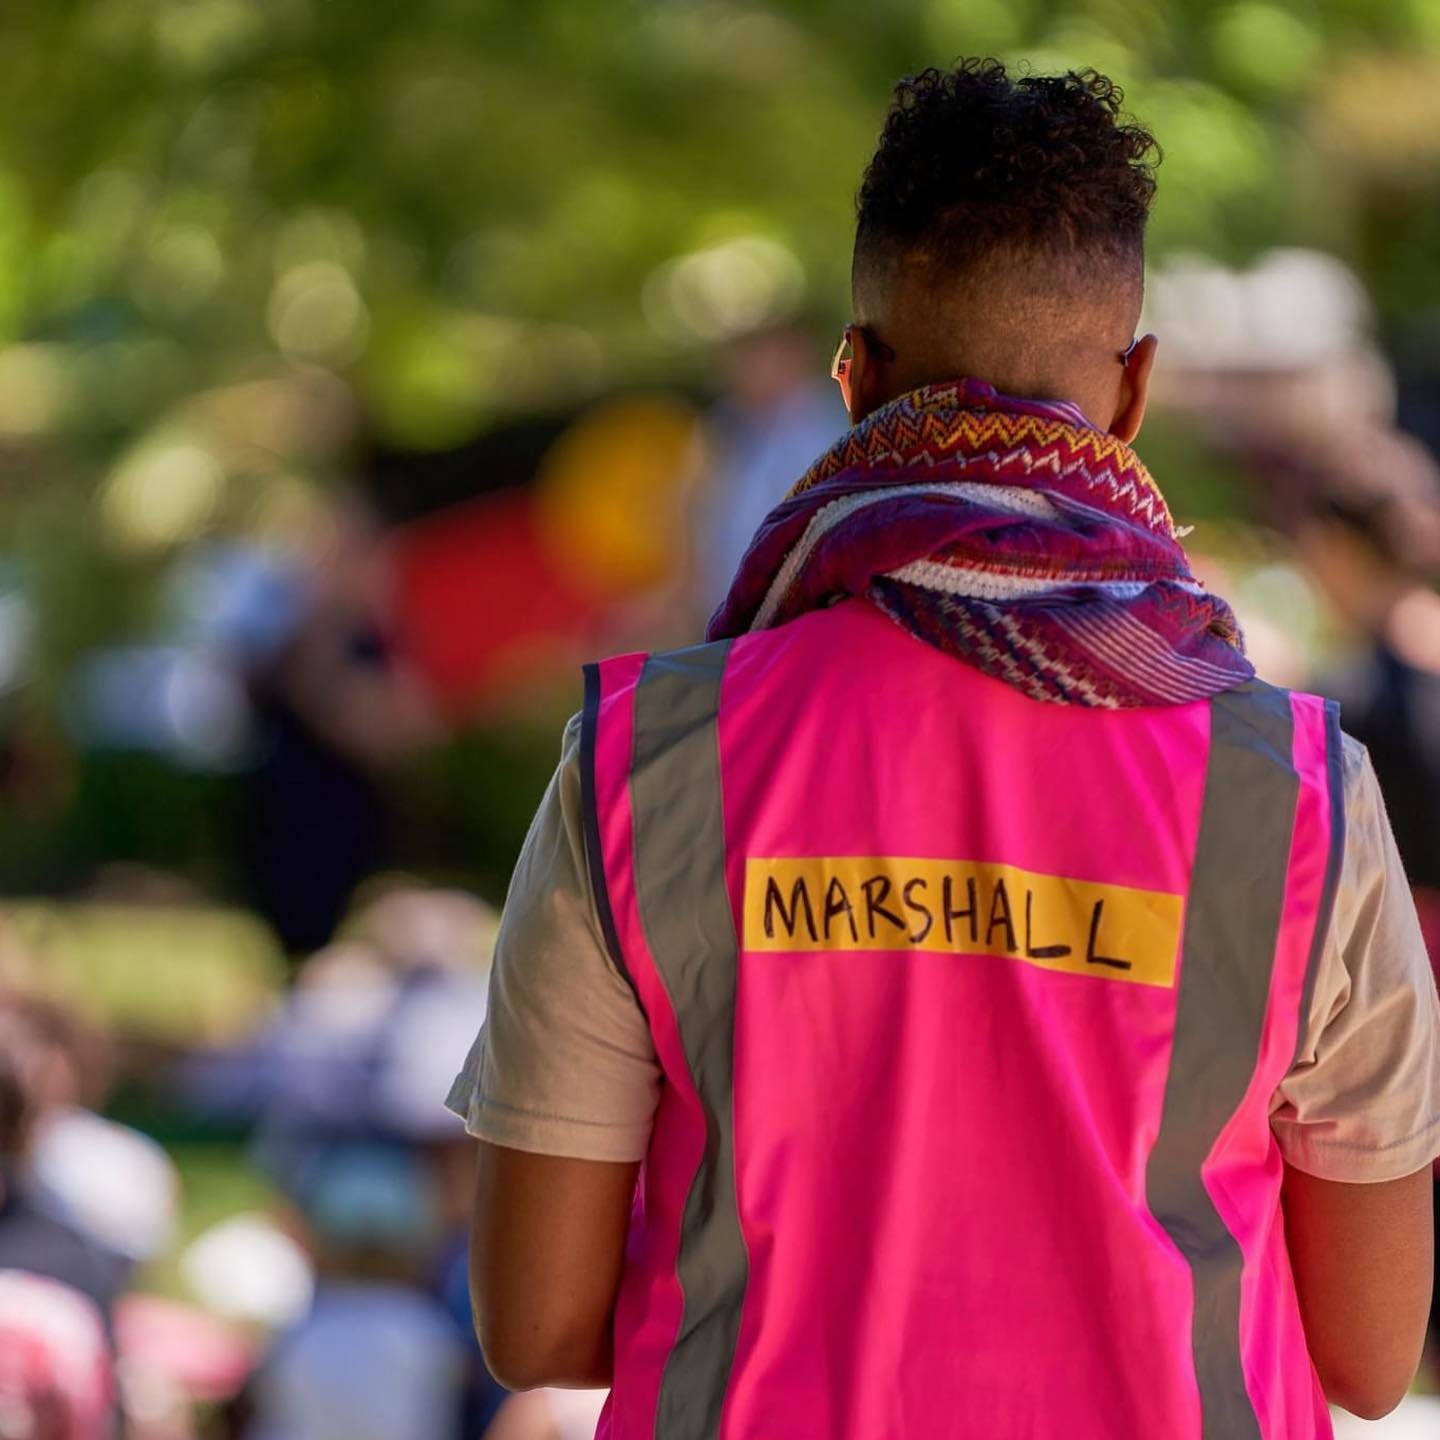 A photo of the back of a person wearing a pink hi-vis vest that reads 'marshall'. They are wearing a purple keffiyah and have short black curly hair with a fade and brown skin.